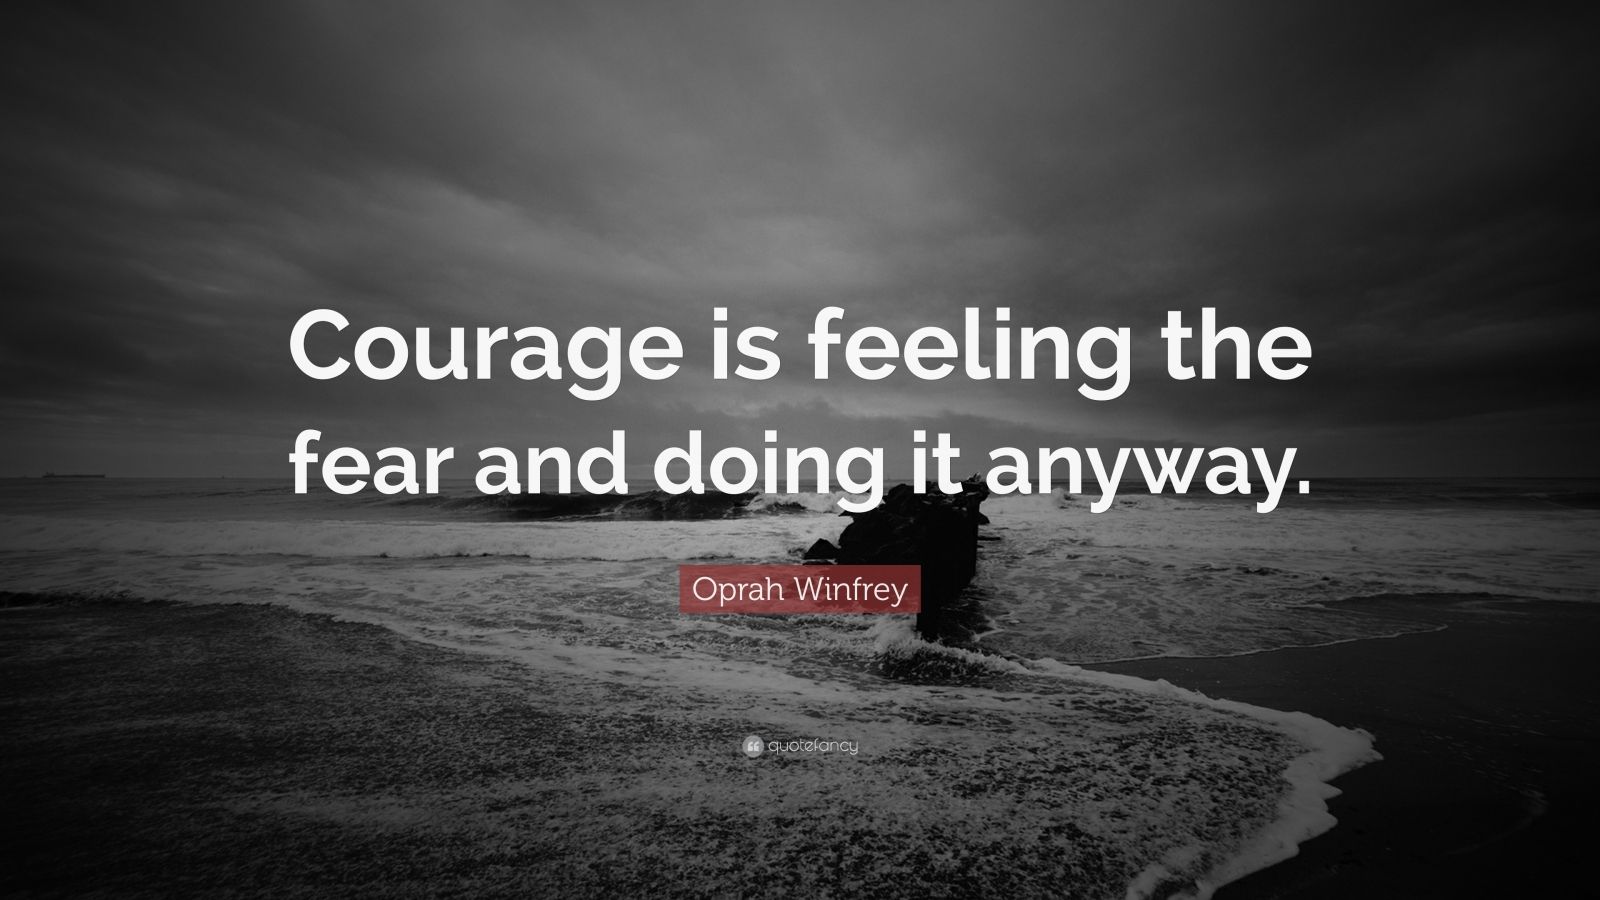 Oprah Winfrey Quote: “Courage is feeling the fear and doing it anyway ...